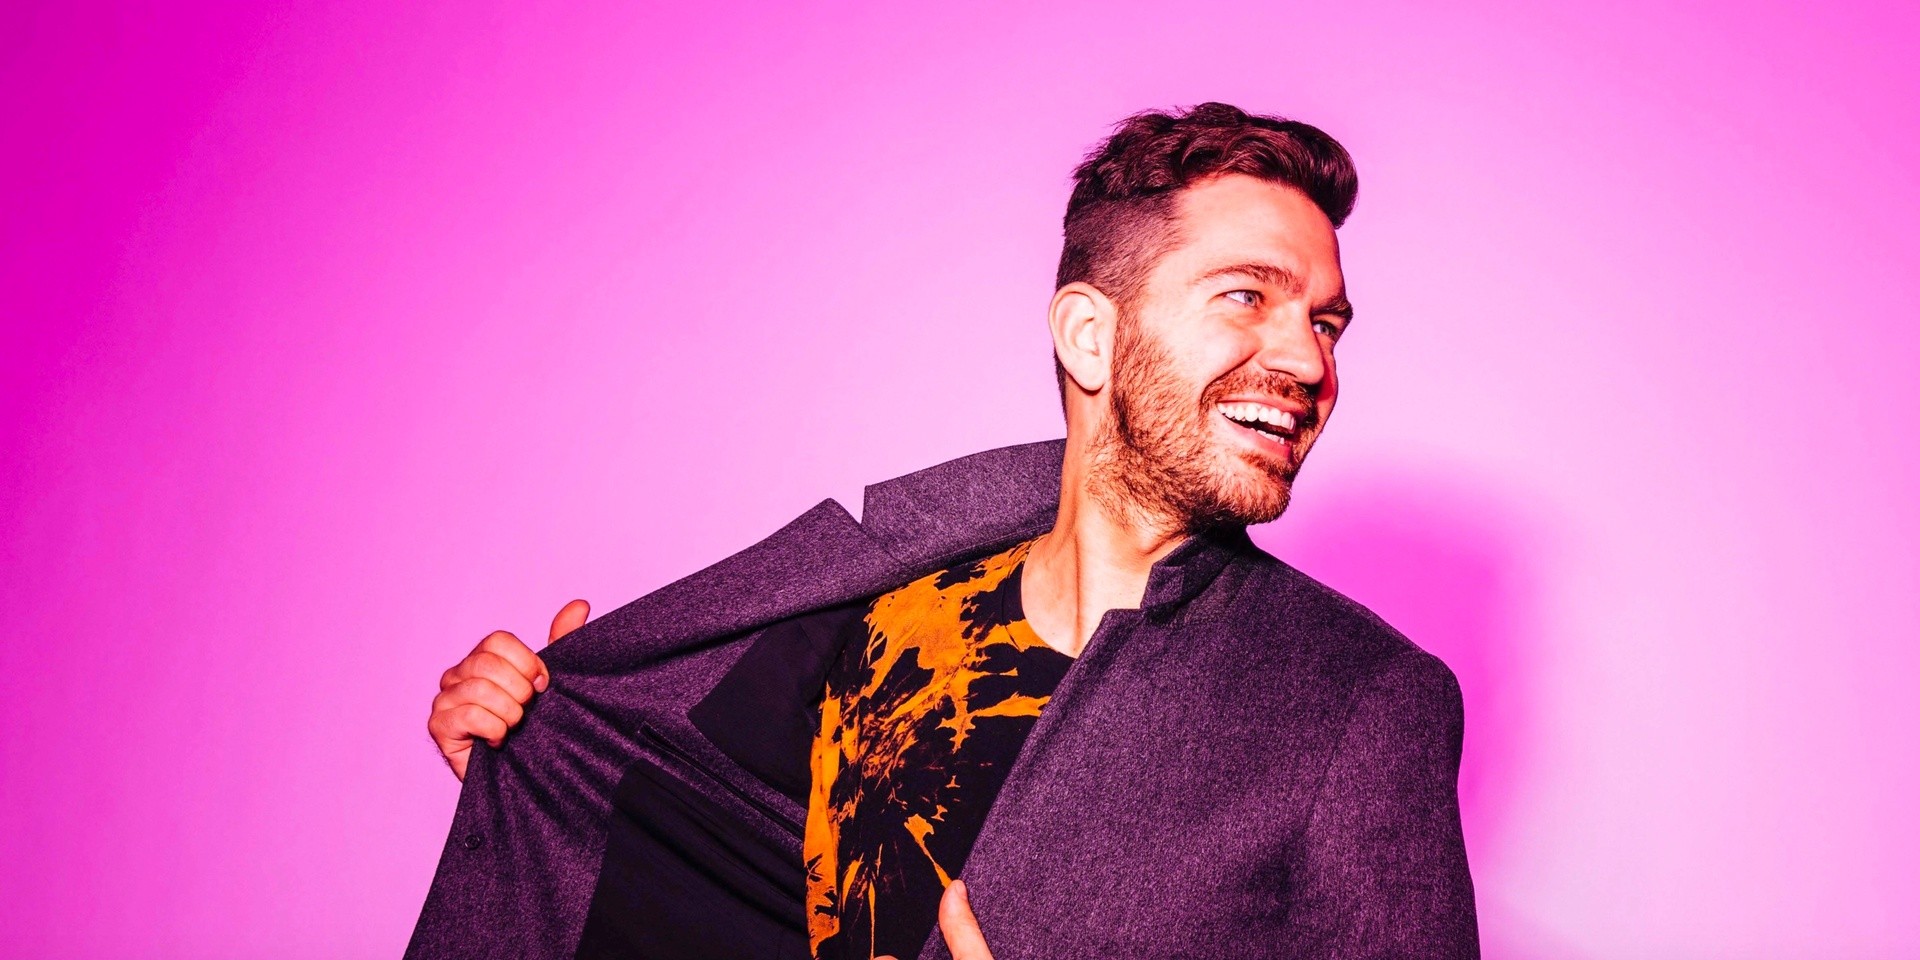 American pop artist Andy Grammer is coming to Manila